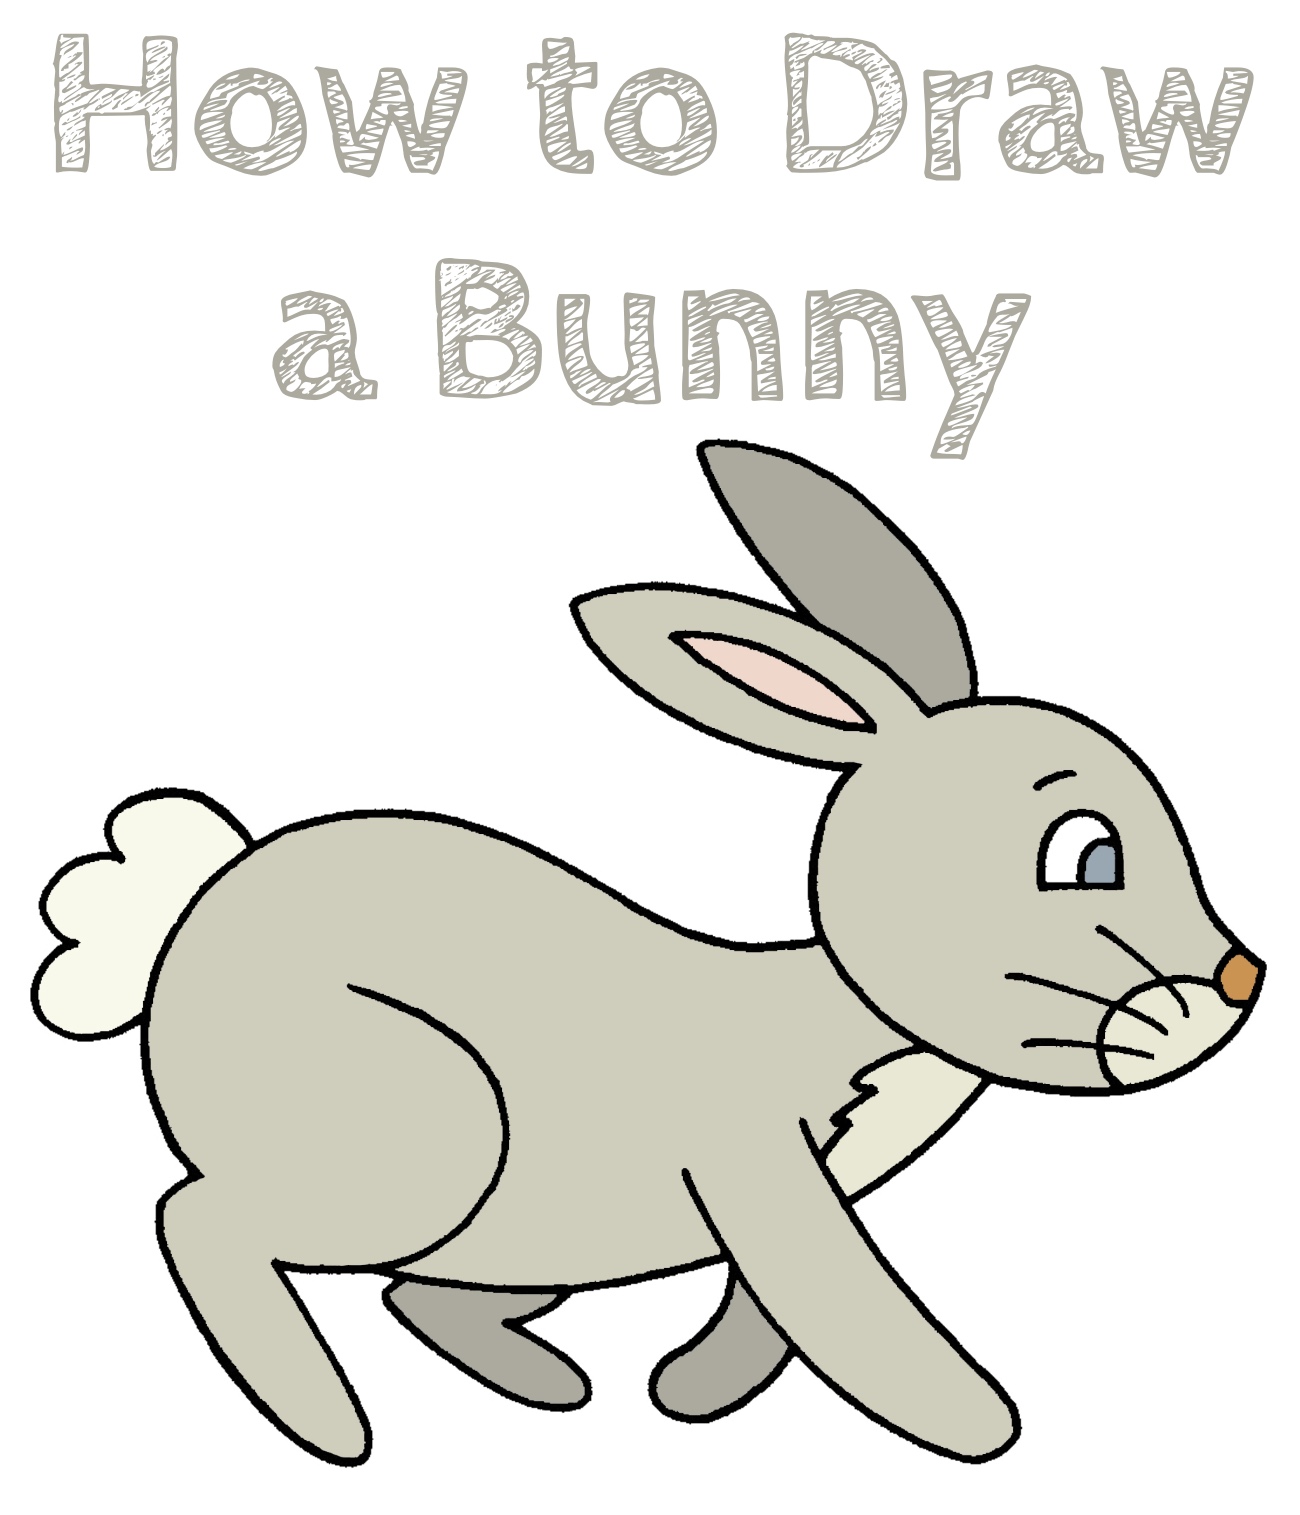 How to Draw a Bunny for Beginners